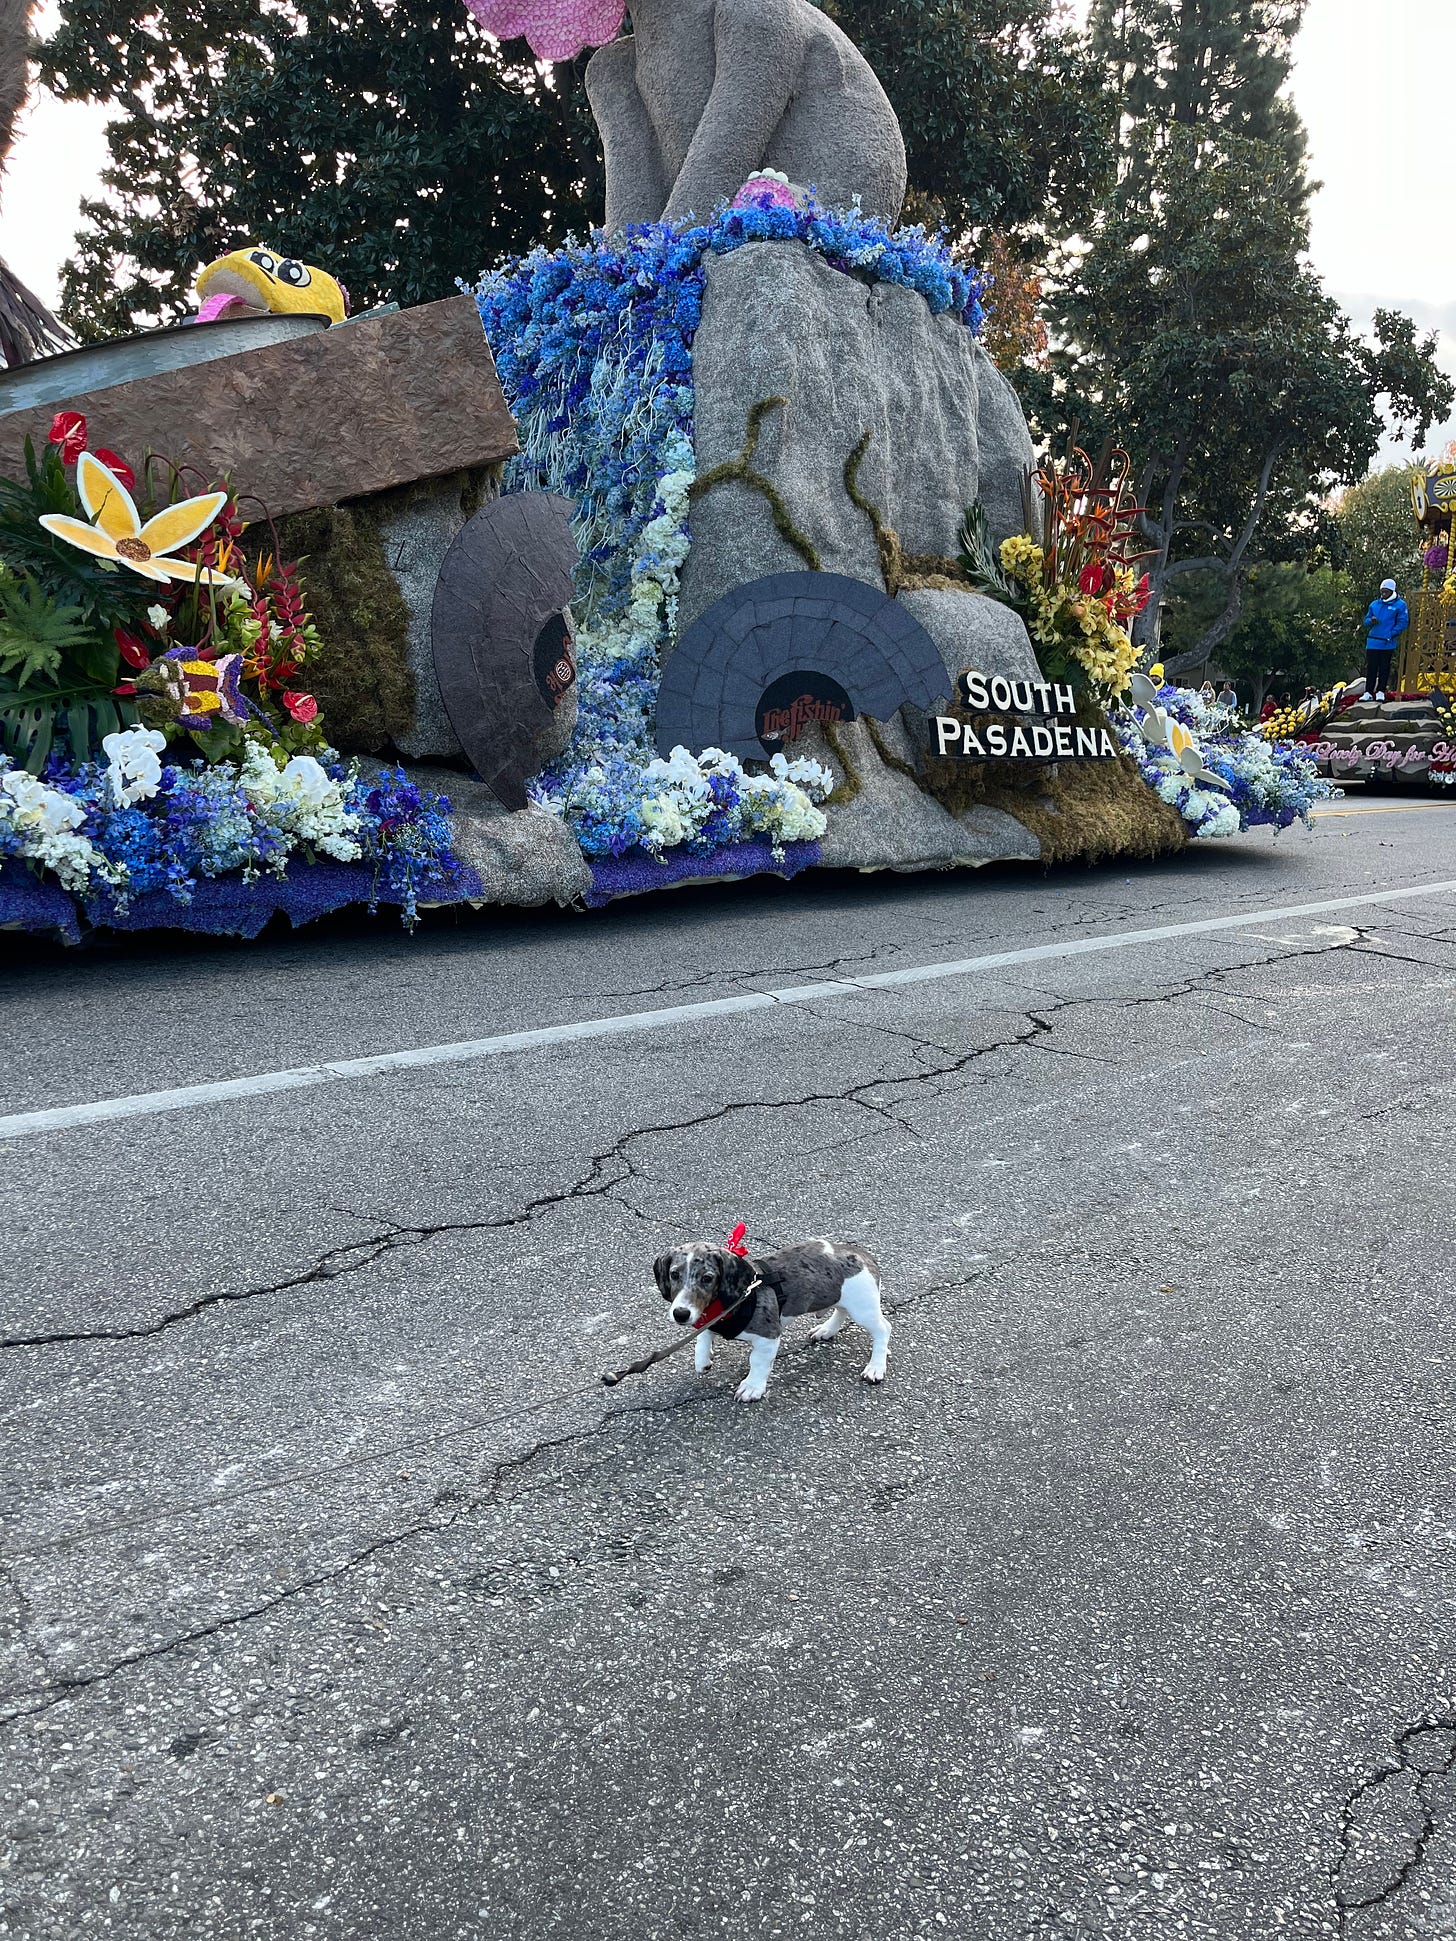 A miniature dachshund in front of the South Pasadena Rose Parade float.